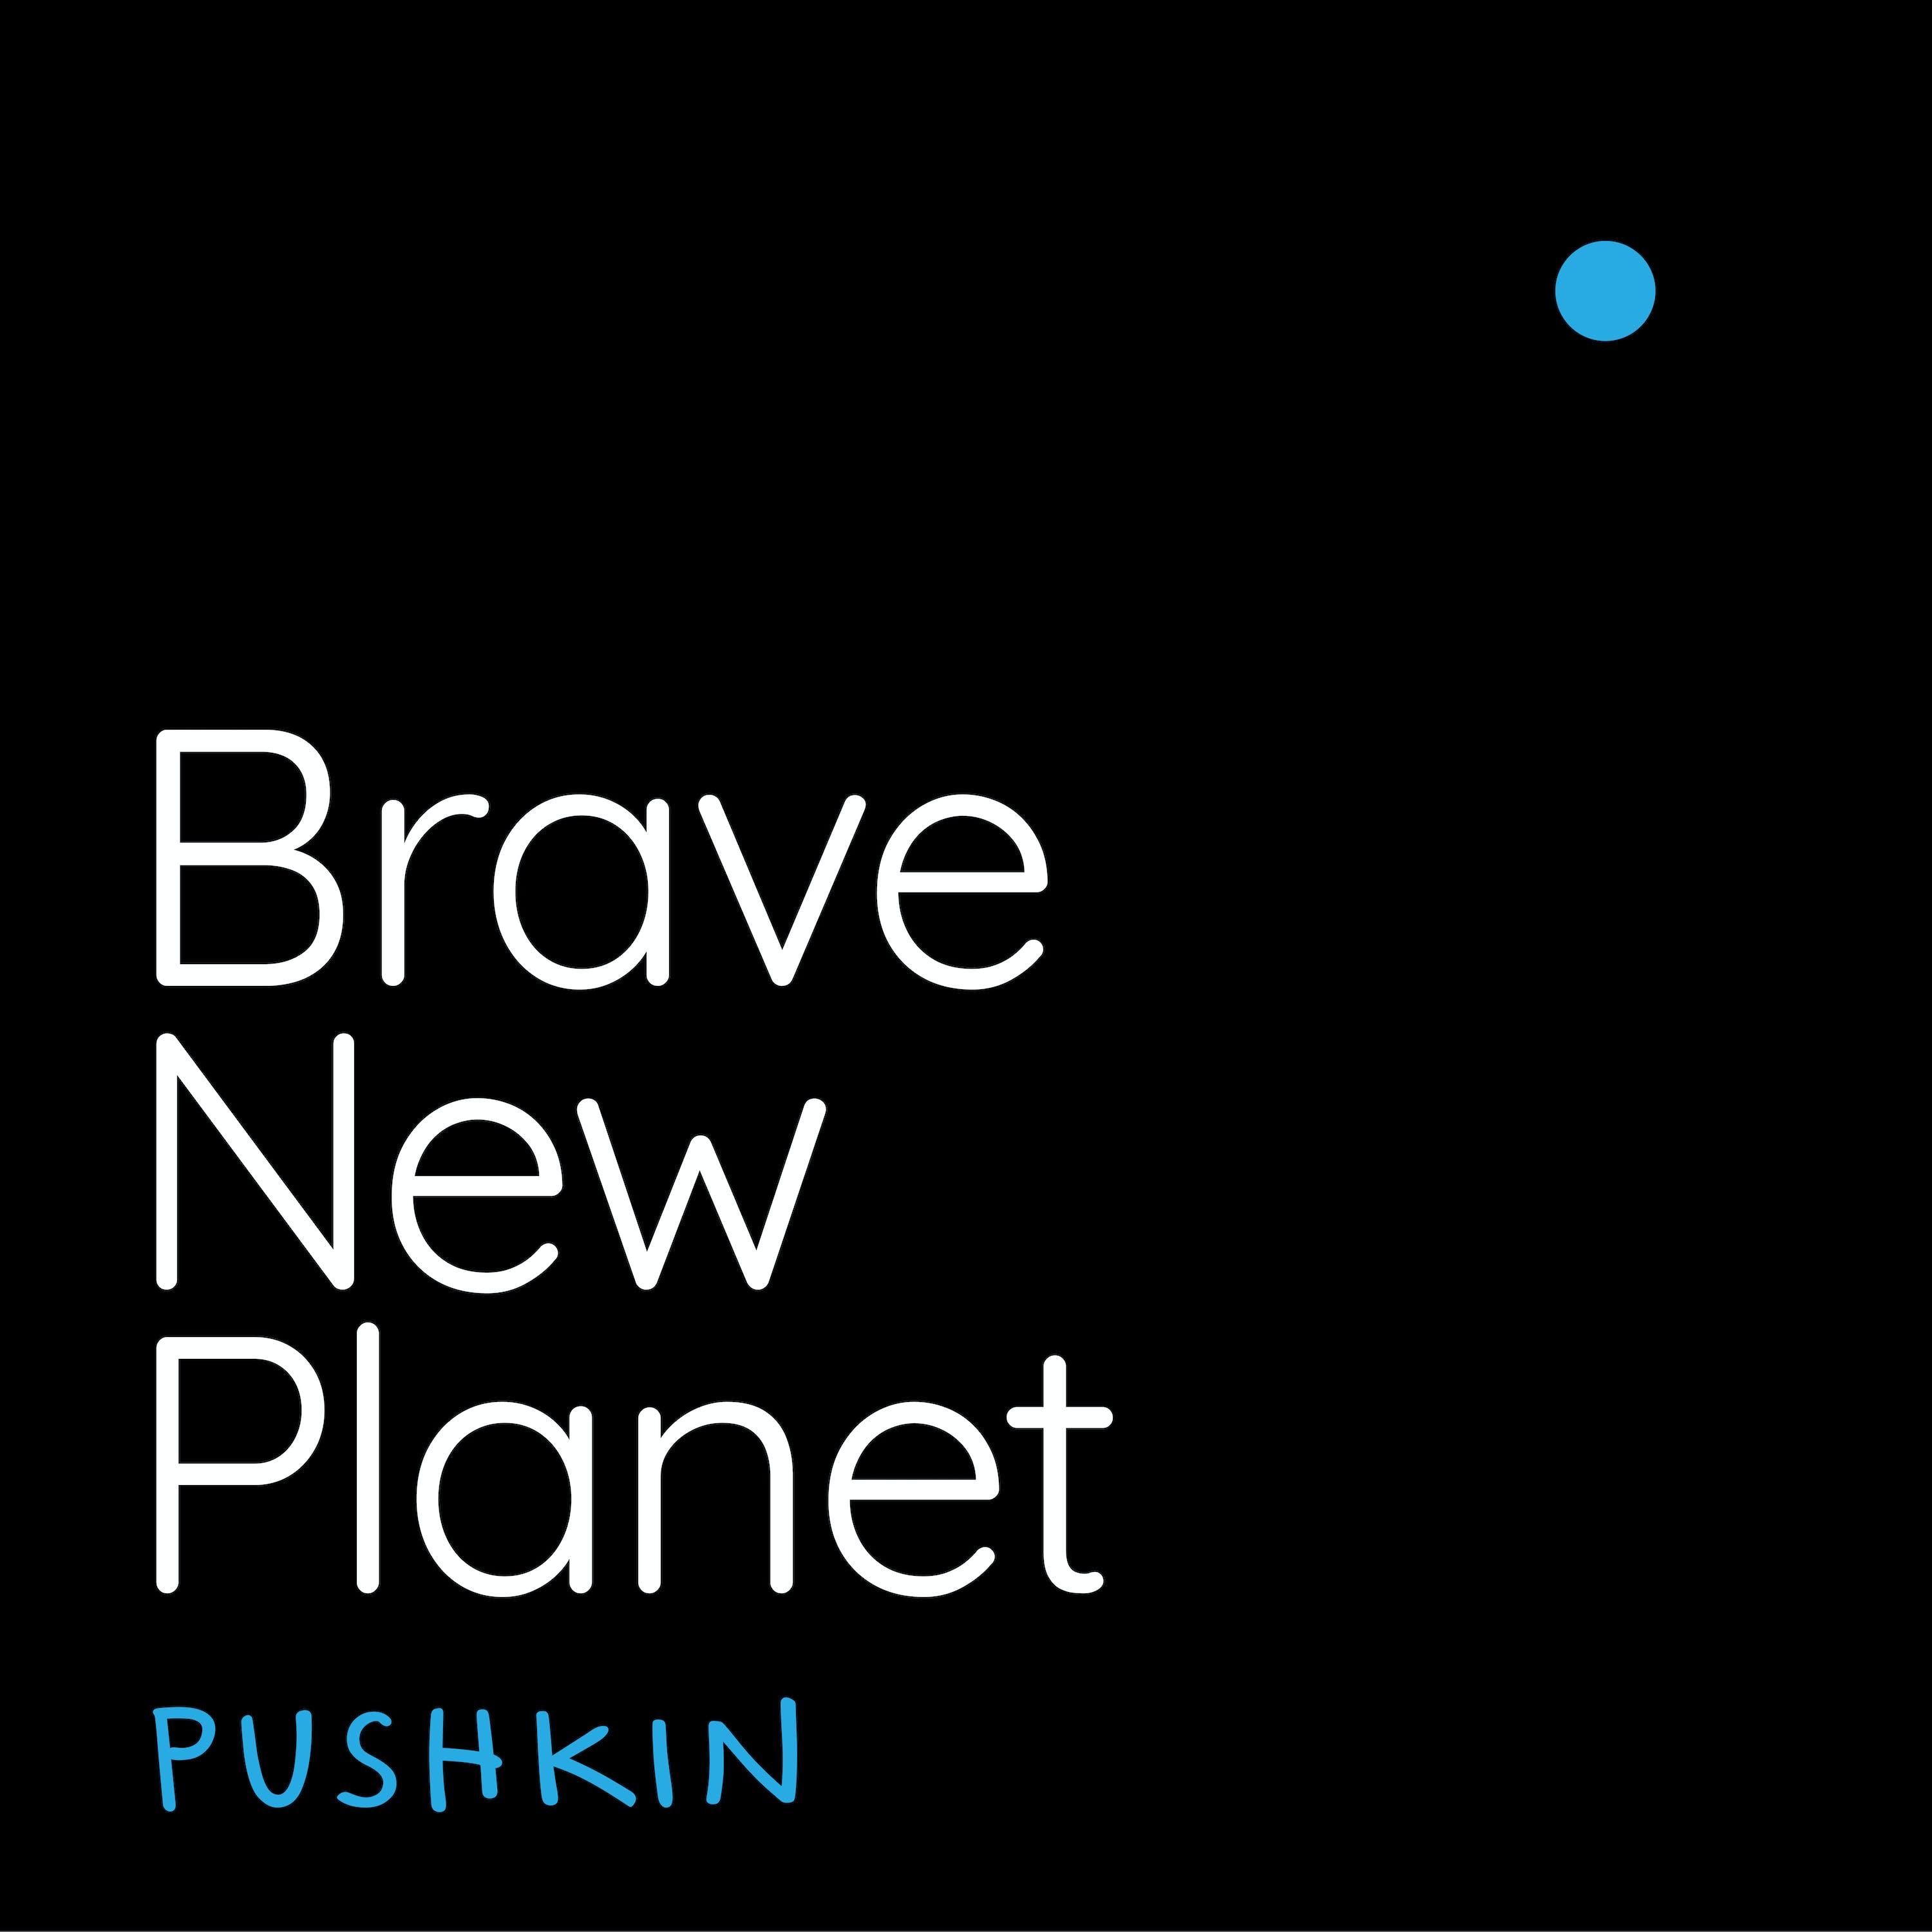 Introducing Brave New Planet